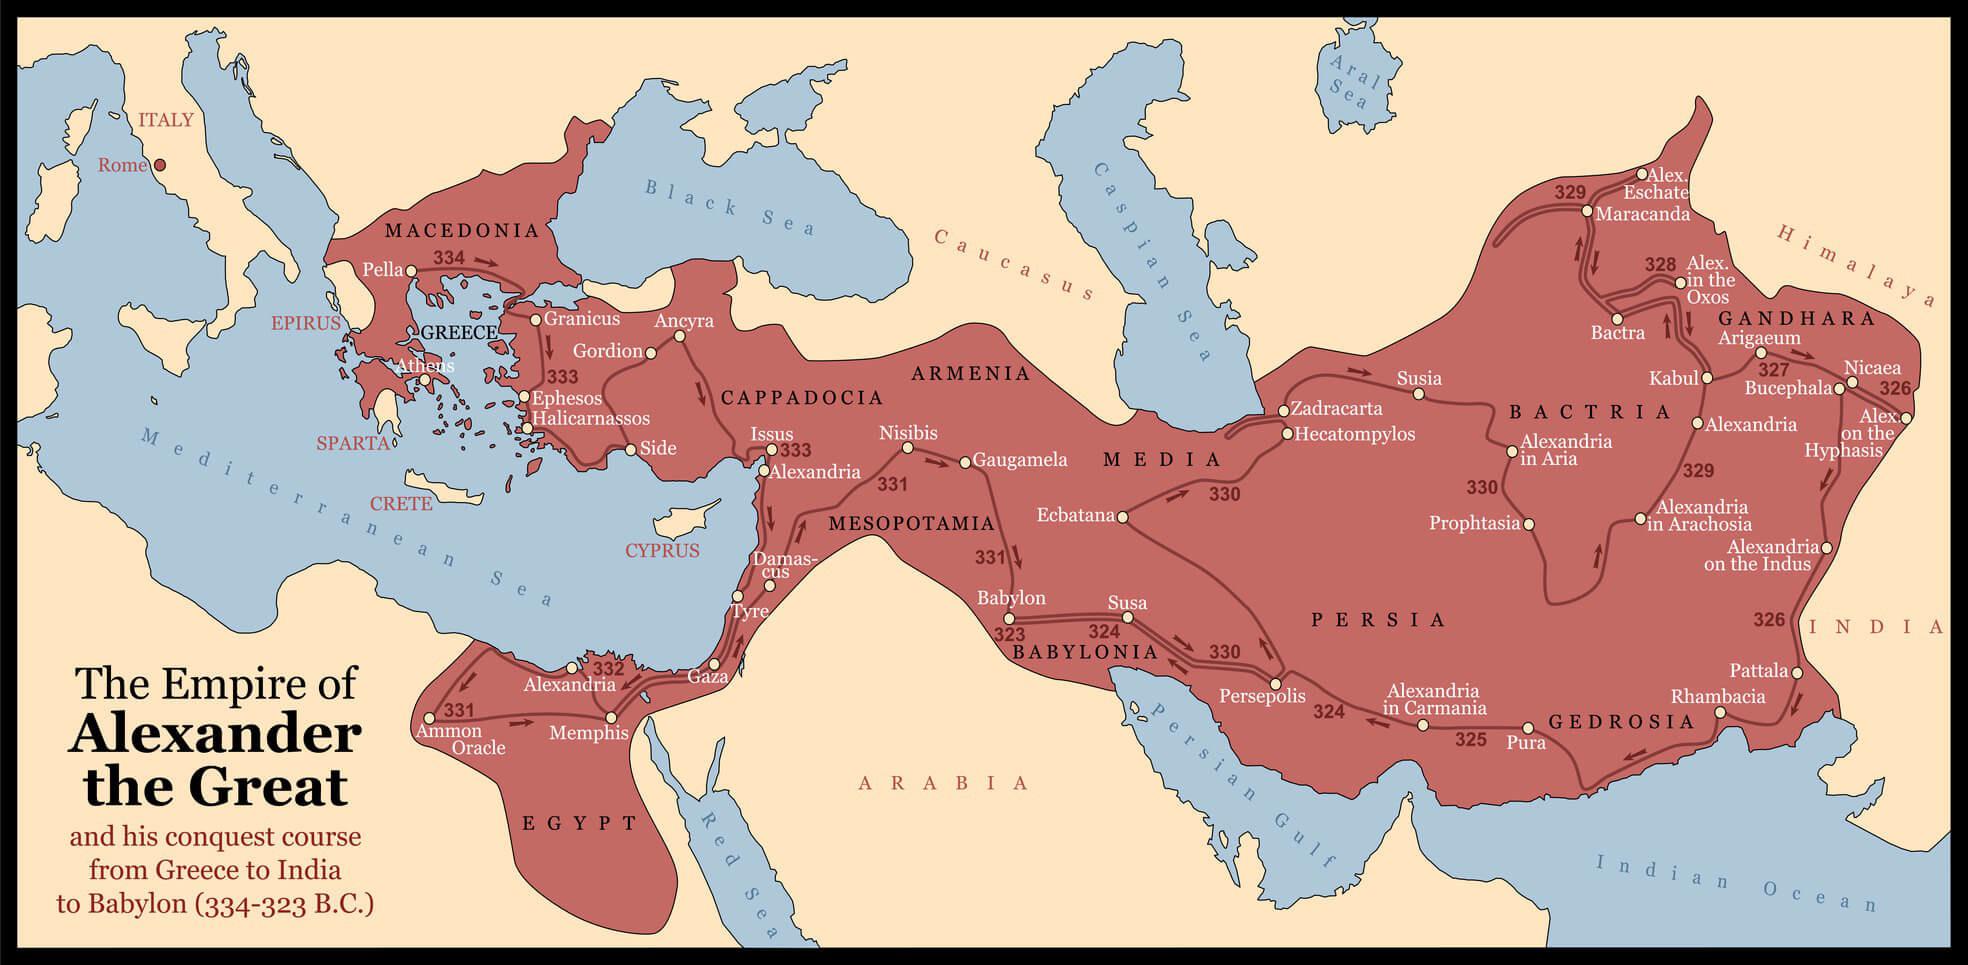 A graphic design of a map detailing the rule of Alexander the Great.